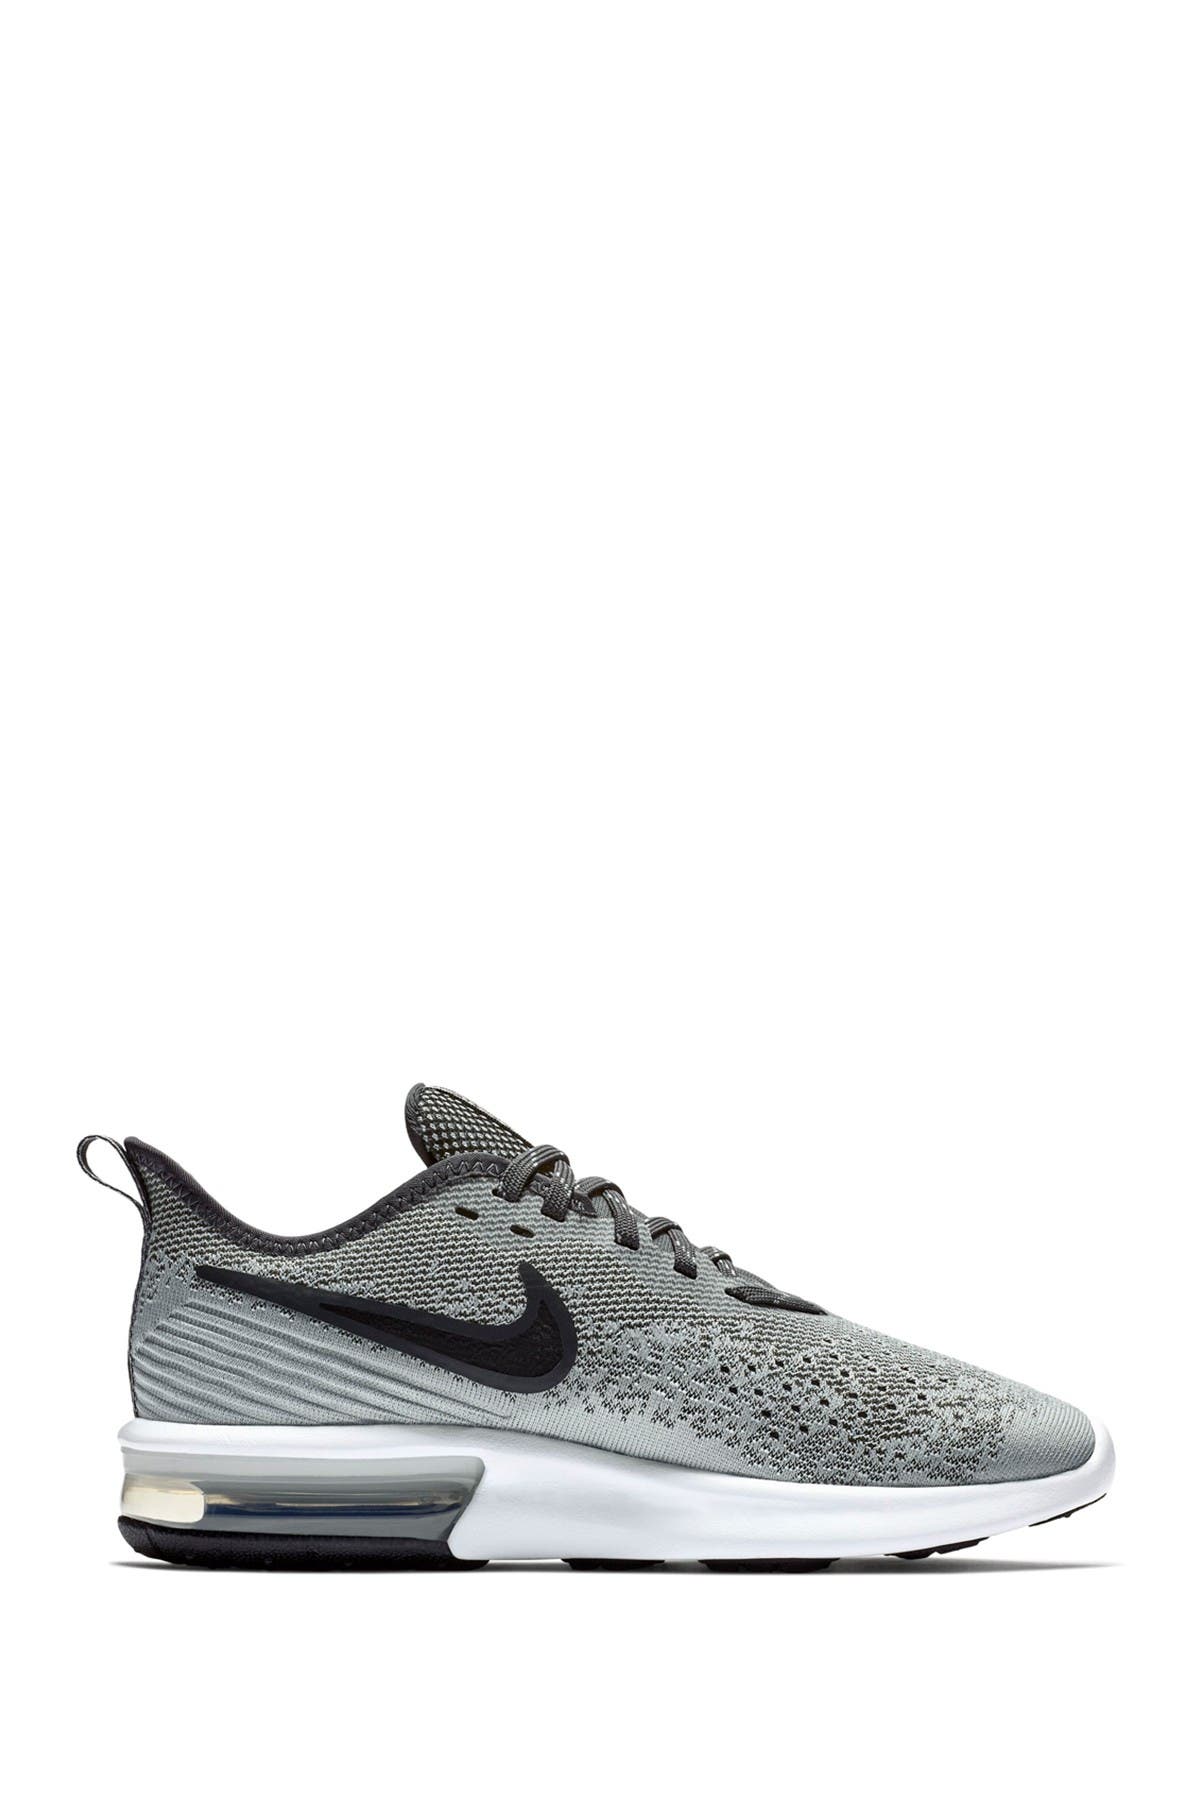 nike sequent 4